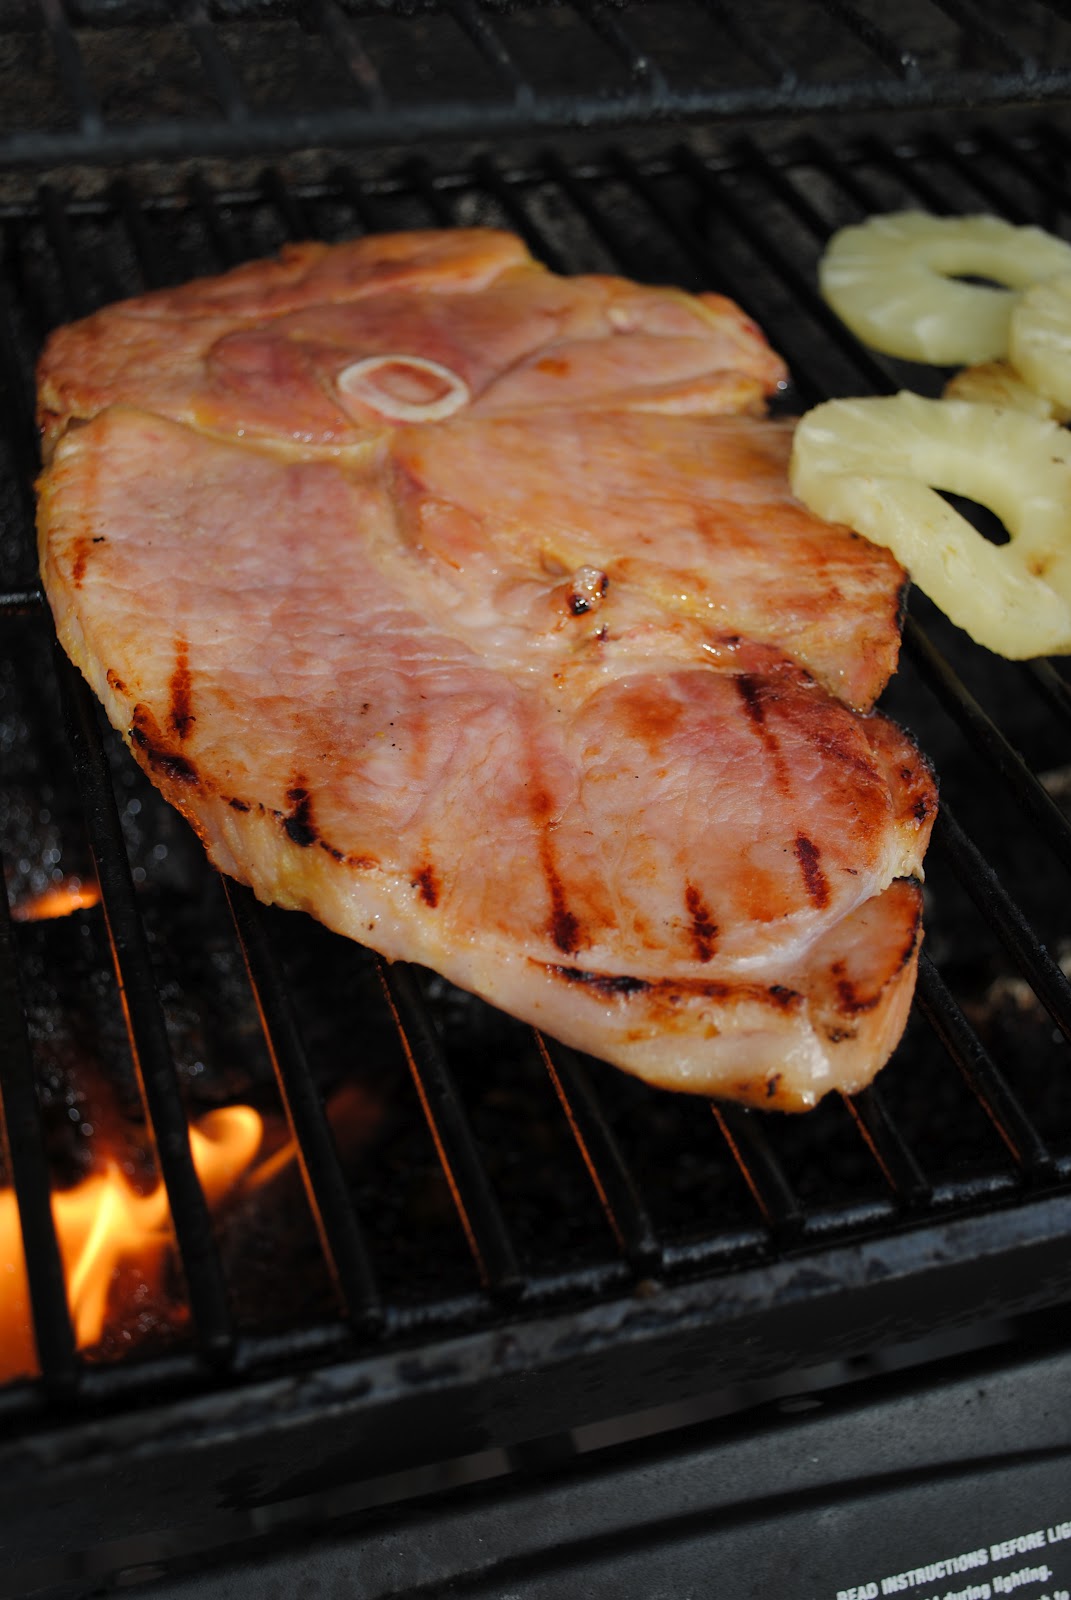 Related Keywords & Suggestions for ham steak with pineapple